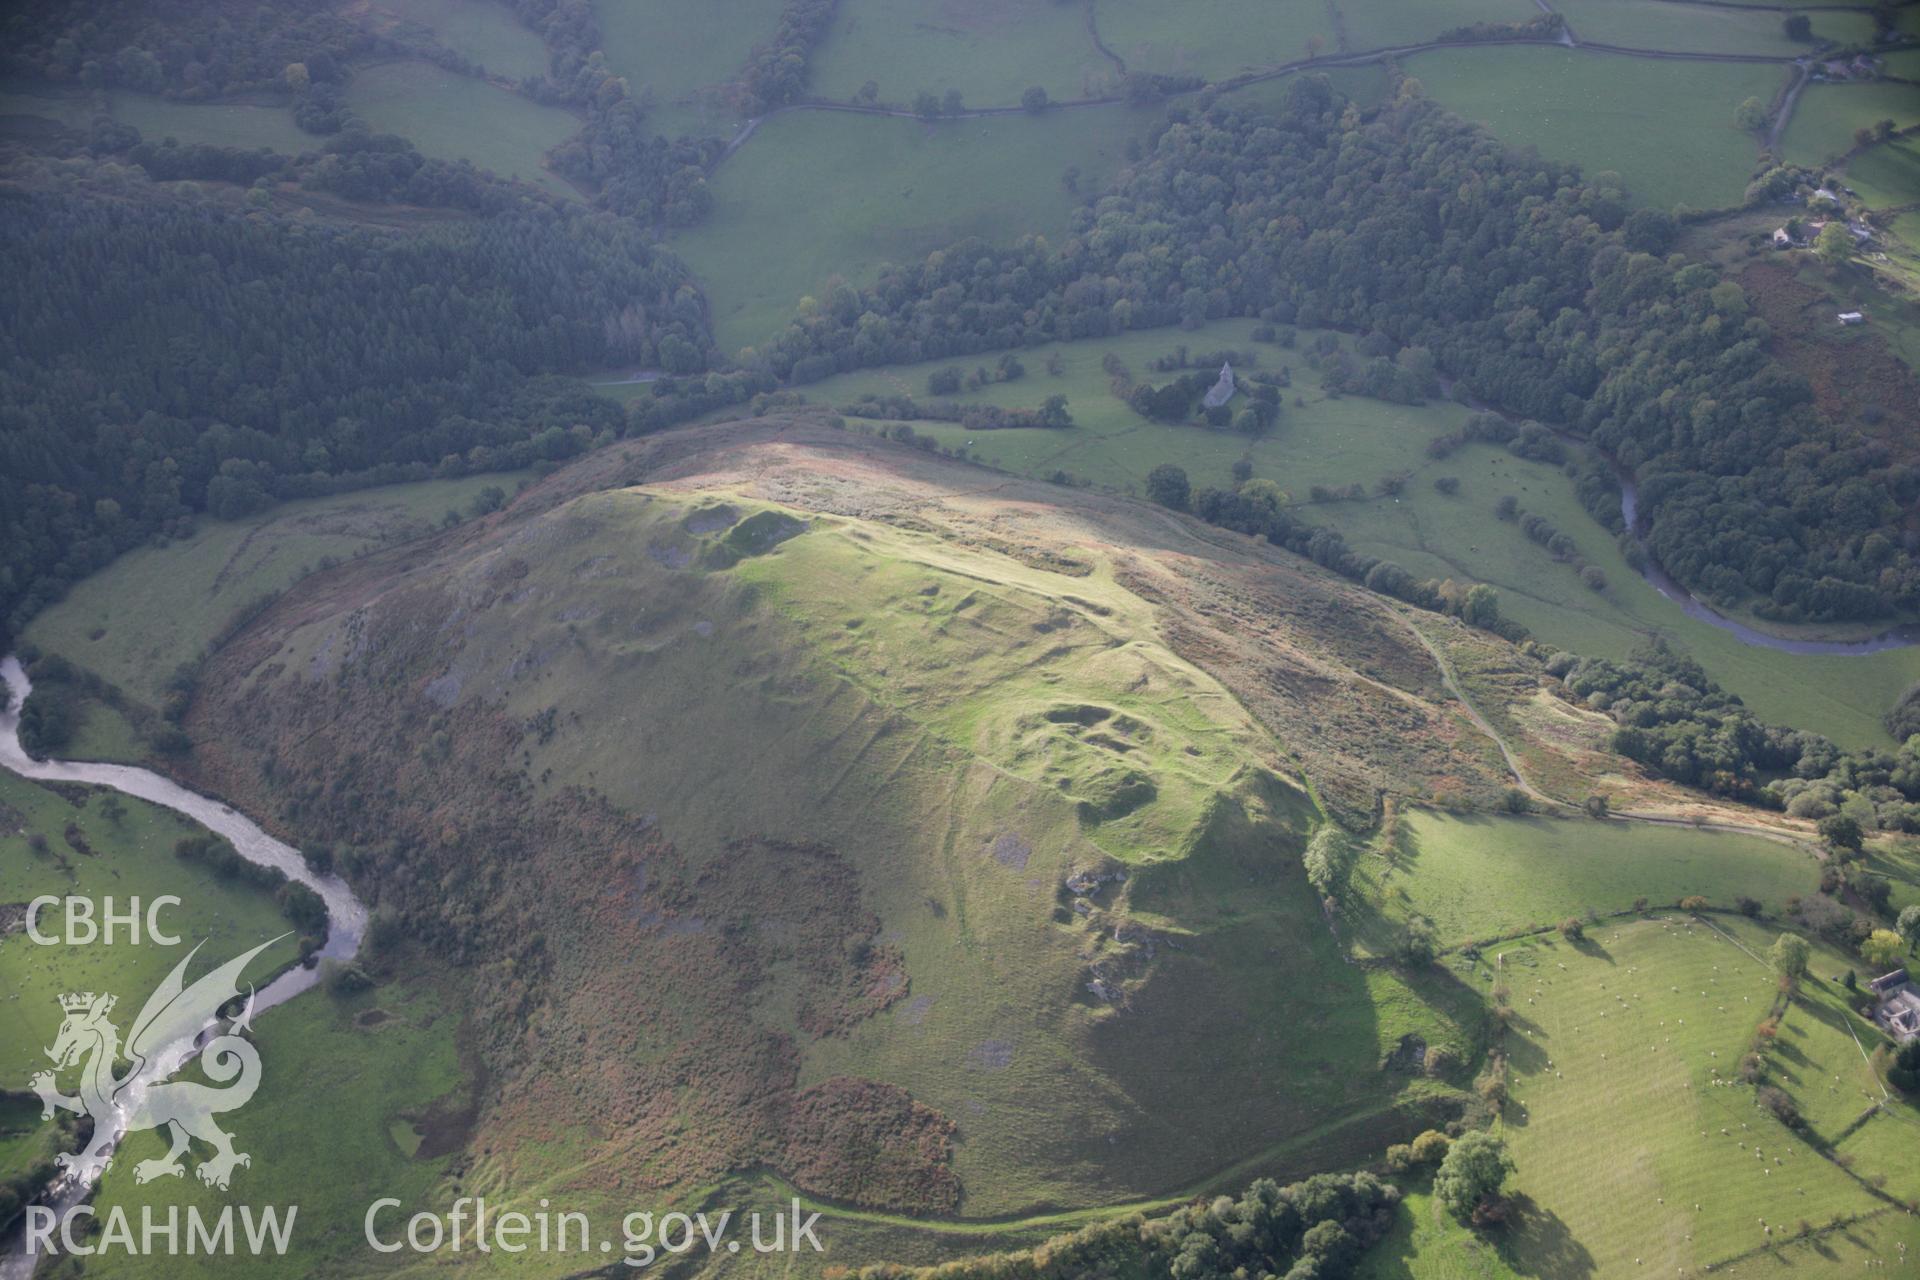 RCAHMW colour oblique aerial photograph of Cefnllys Castle from the north-east. Taken on 13 October 2005 by Toby Driver